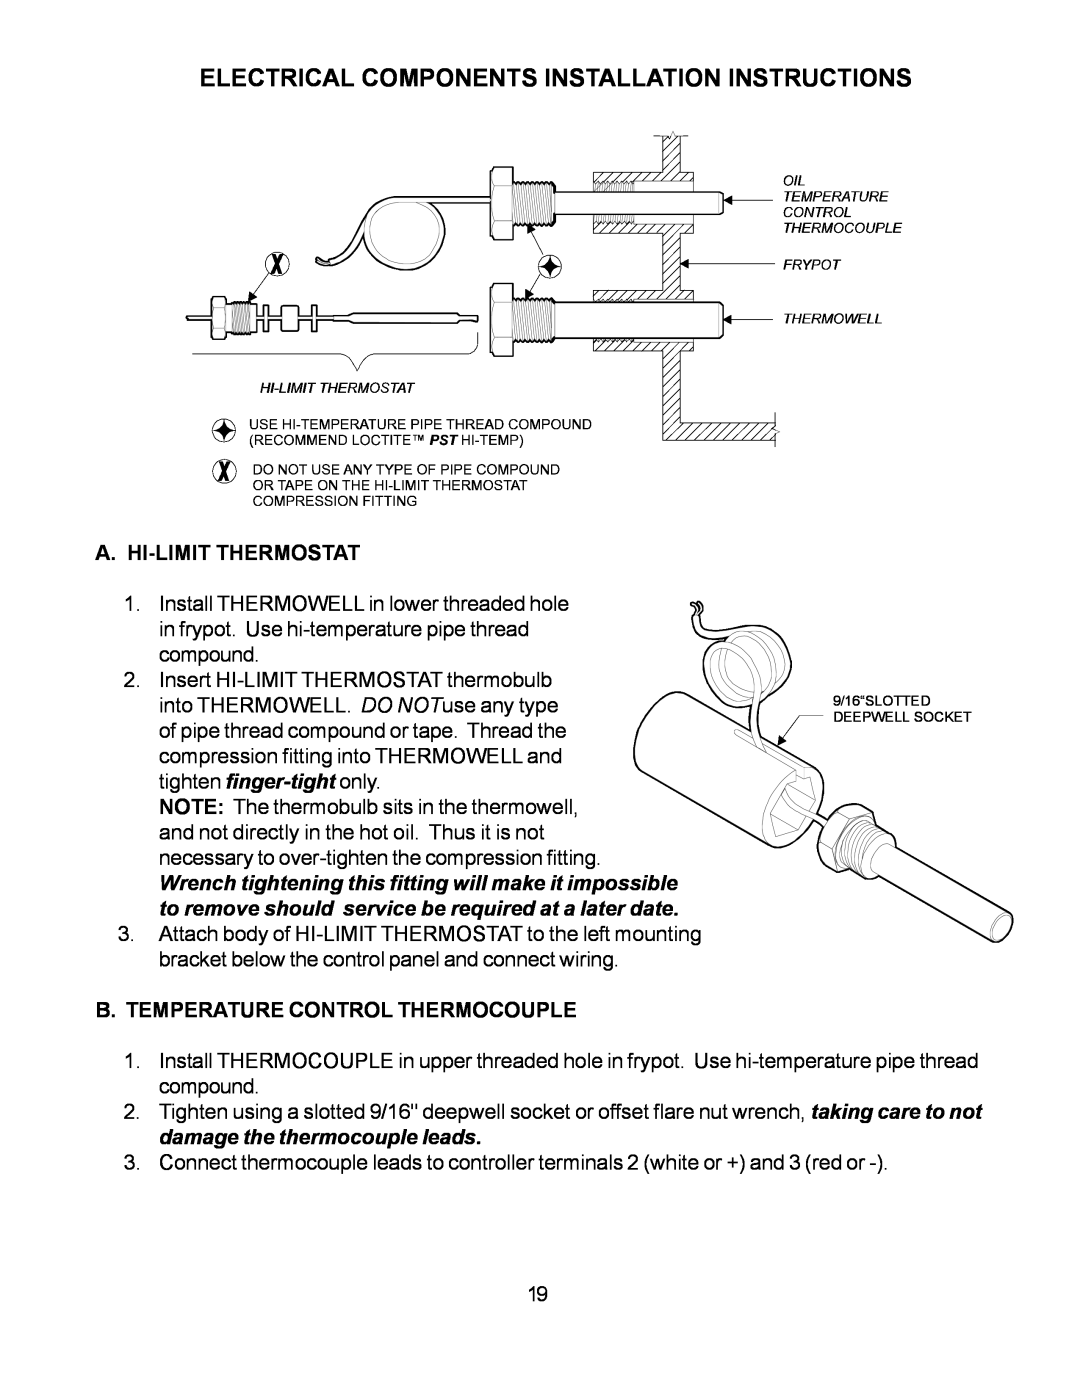 Wells WFGA-60FS service manual Electrical Components Installation Instructions, A. Hi-Limit Thermostat 